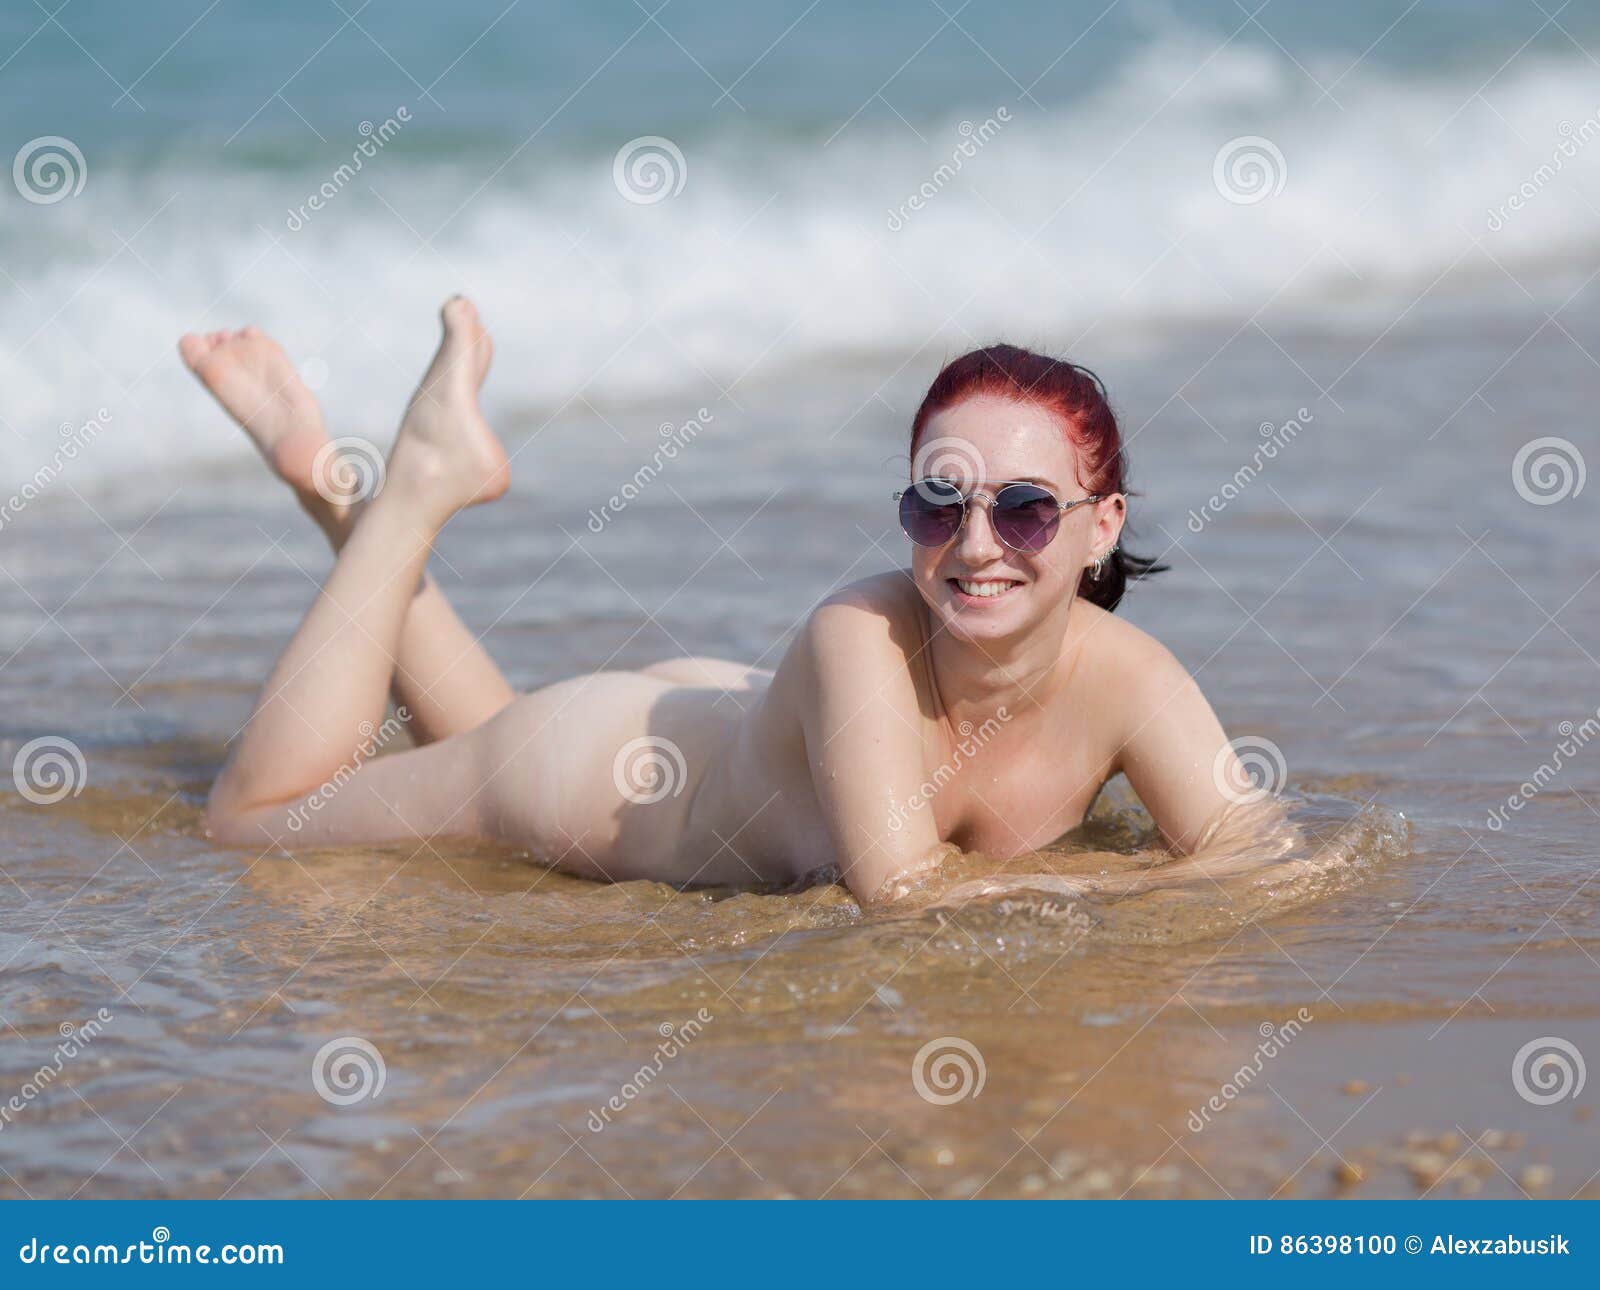 Beach Girls Naked On Webcam - Girl in Sunglasses Lays on Sand Looks at Camera Smiling Stock Photo - Image  of hair, lifestyle: 86398100